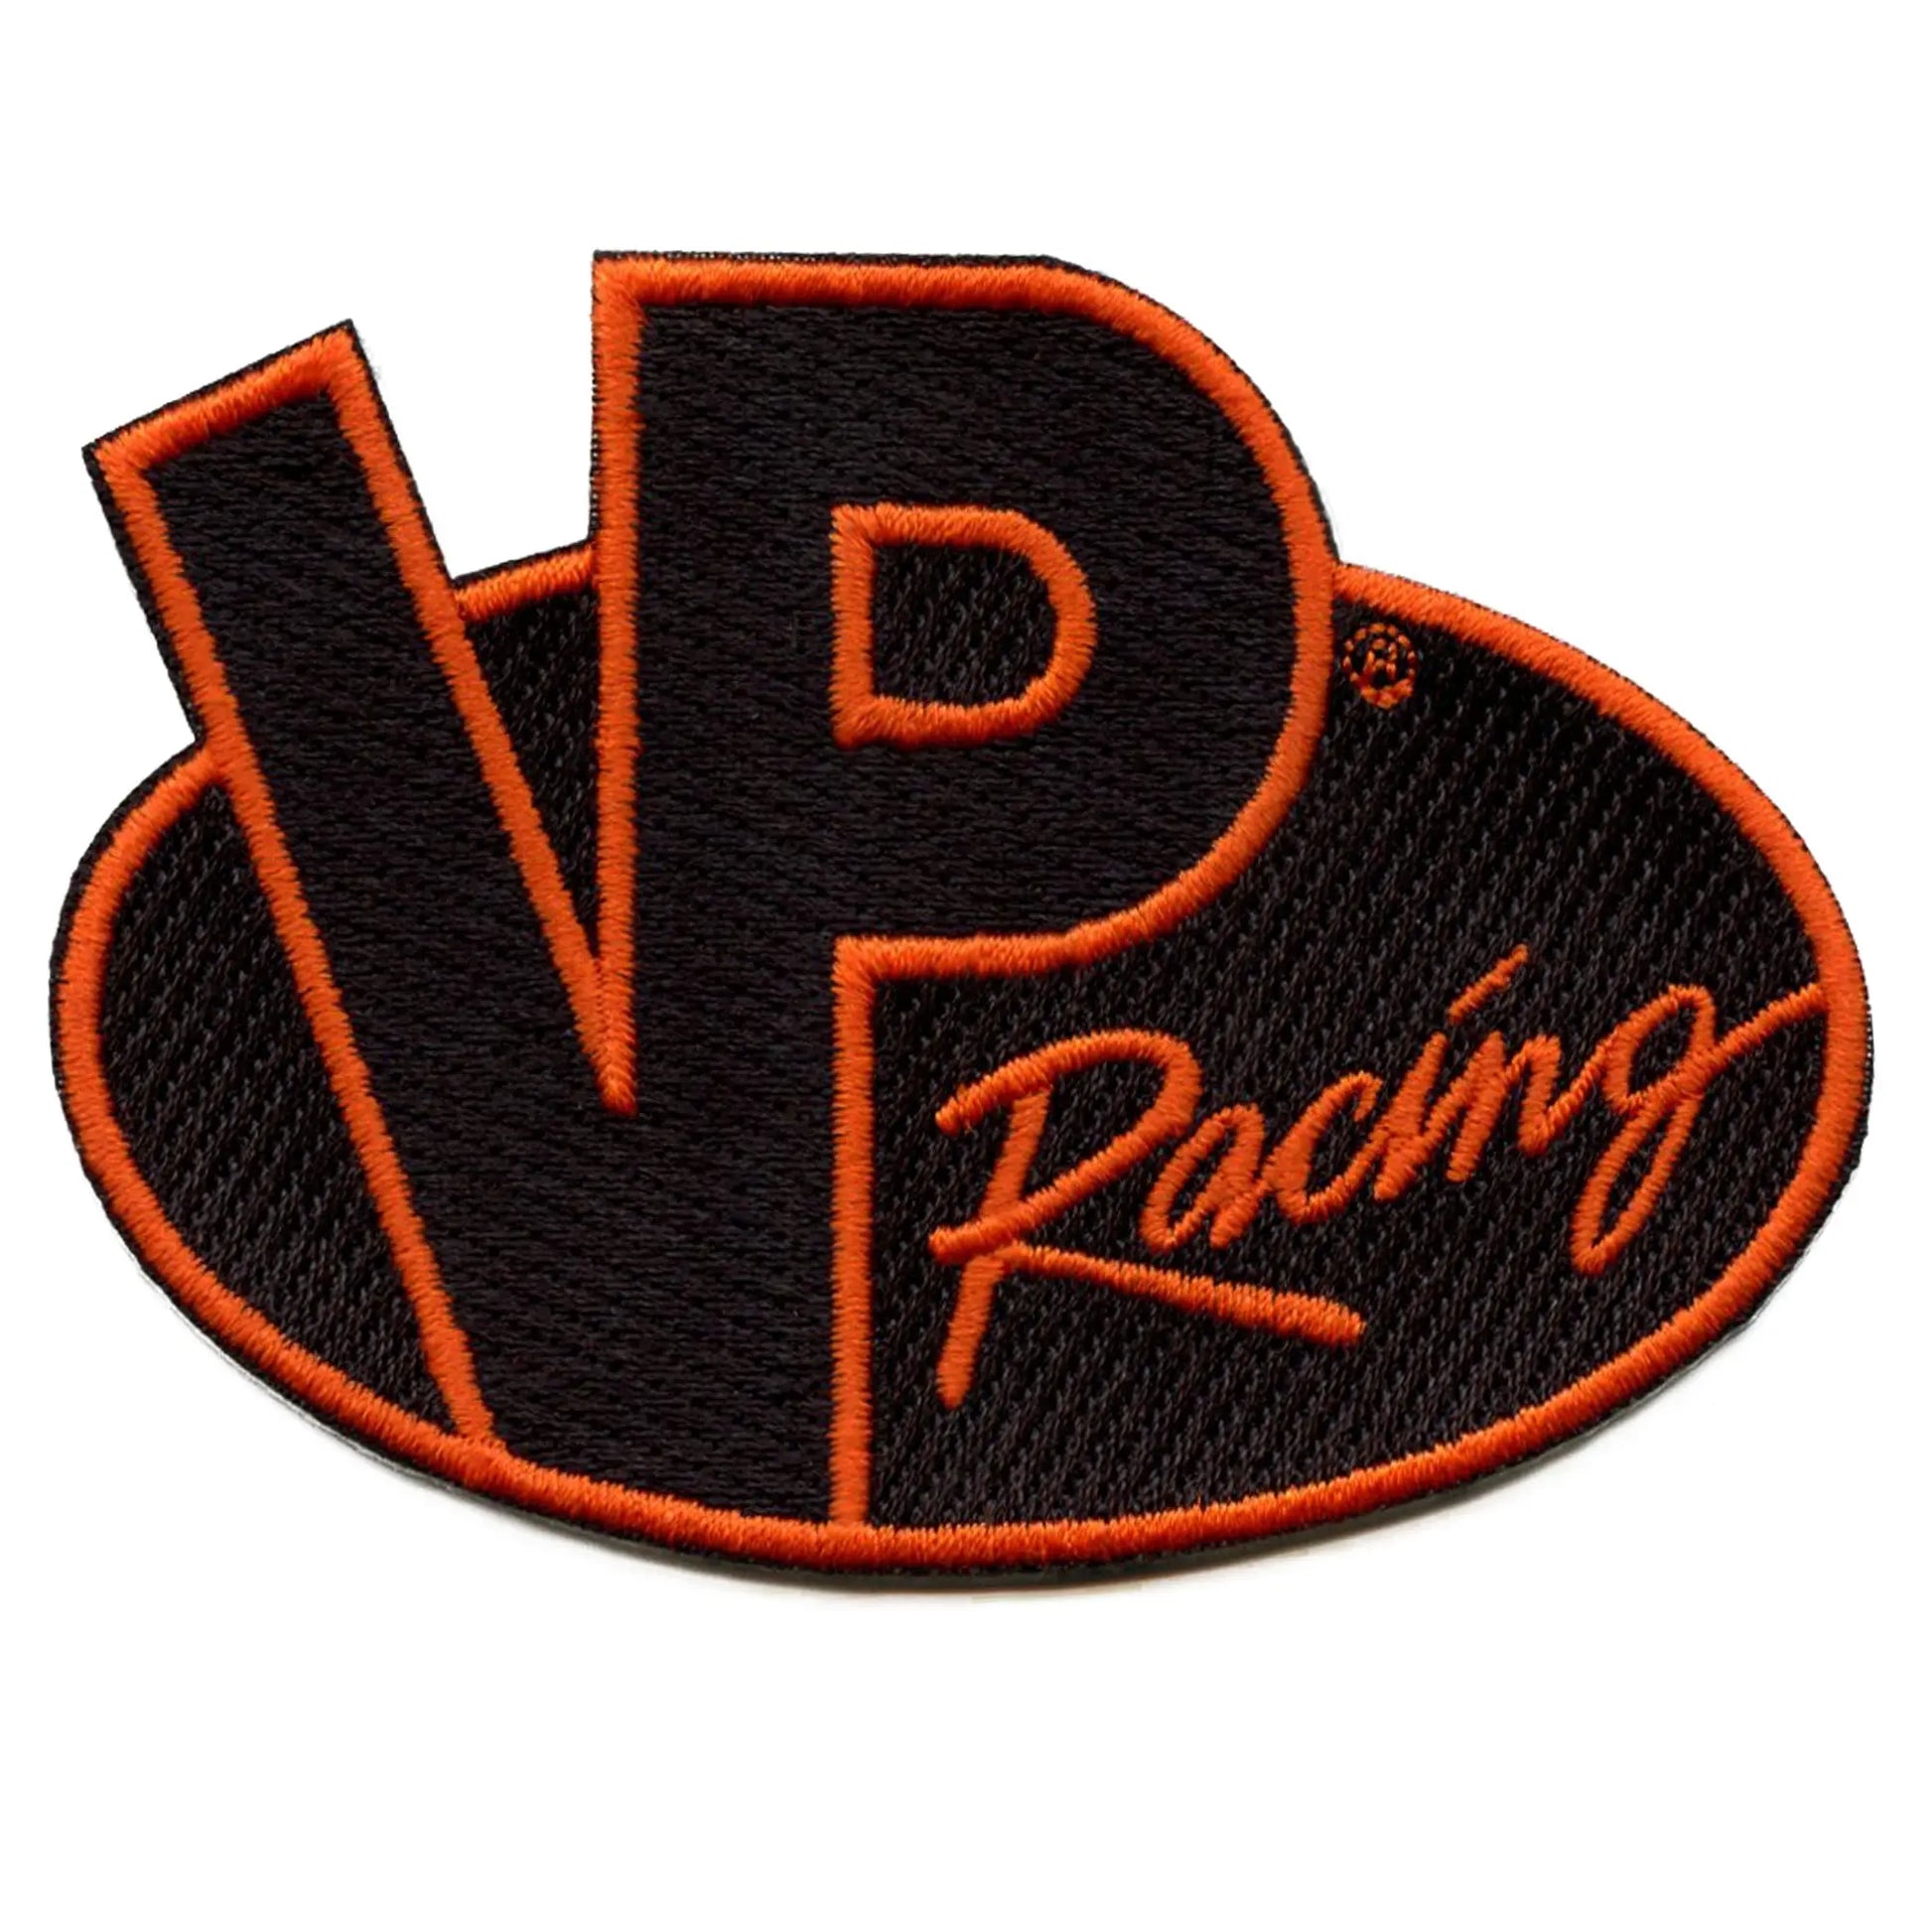 VP Racing V Twin Patch Fuel Logo Octane Embroidered Iron On